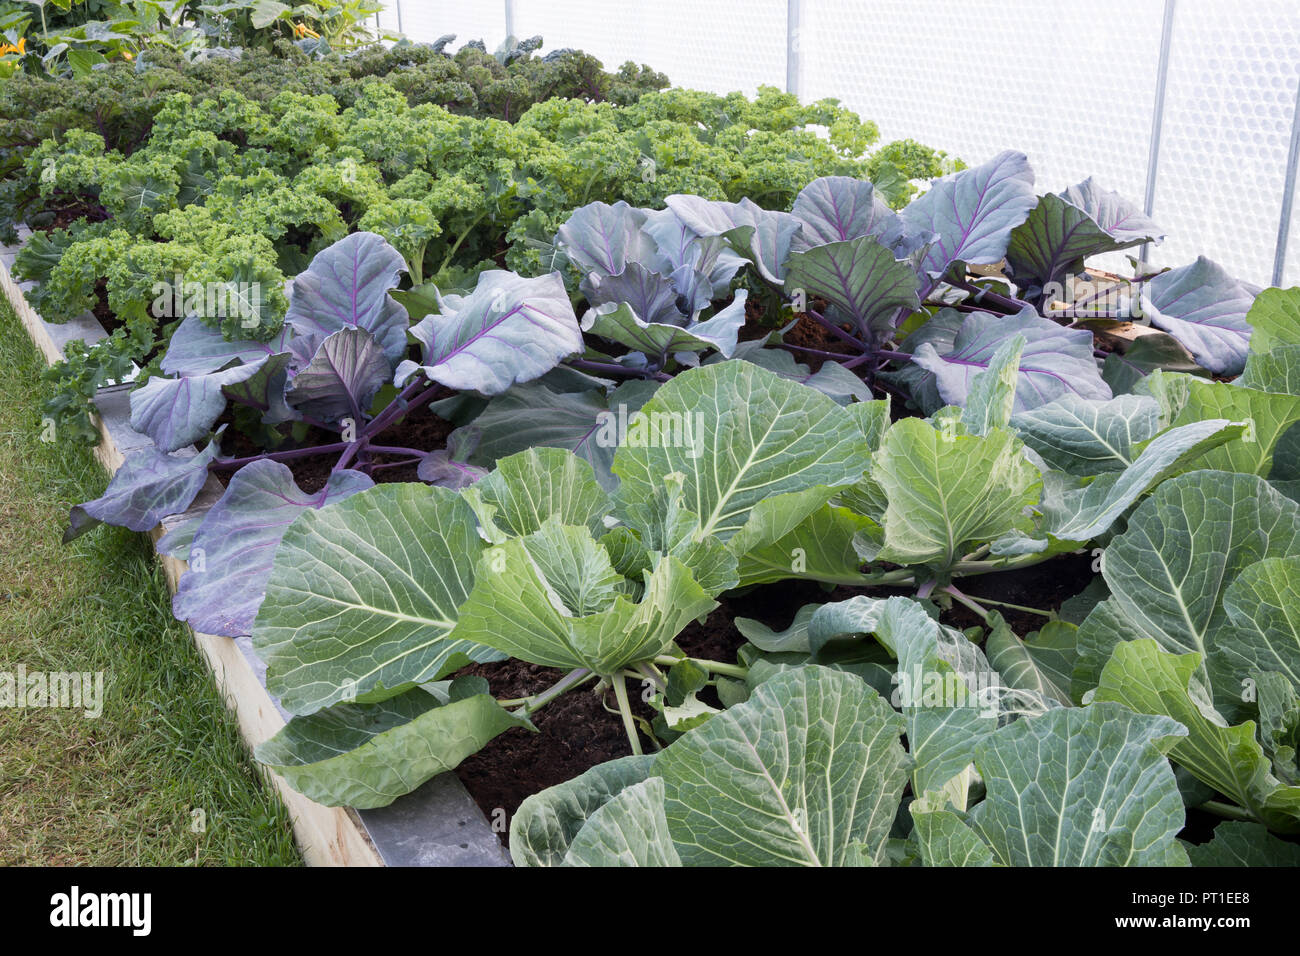 insulated polytunnel with raised beds growing organic white cabbage and red cabbage 'Kalibos', curly leaf kale 'Reflex' Stock Photo